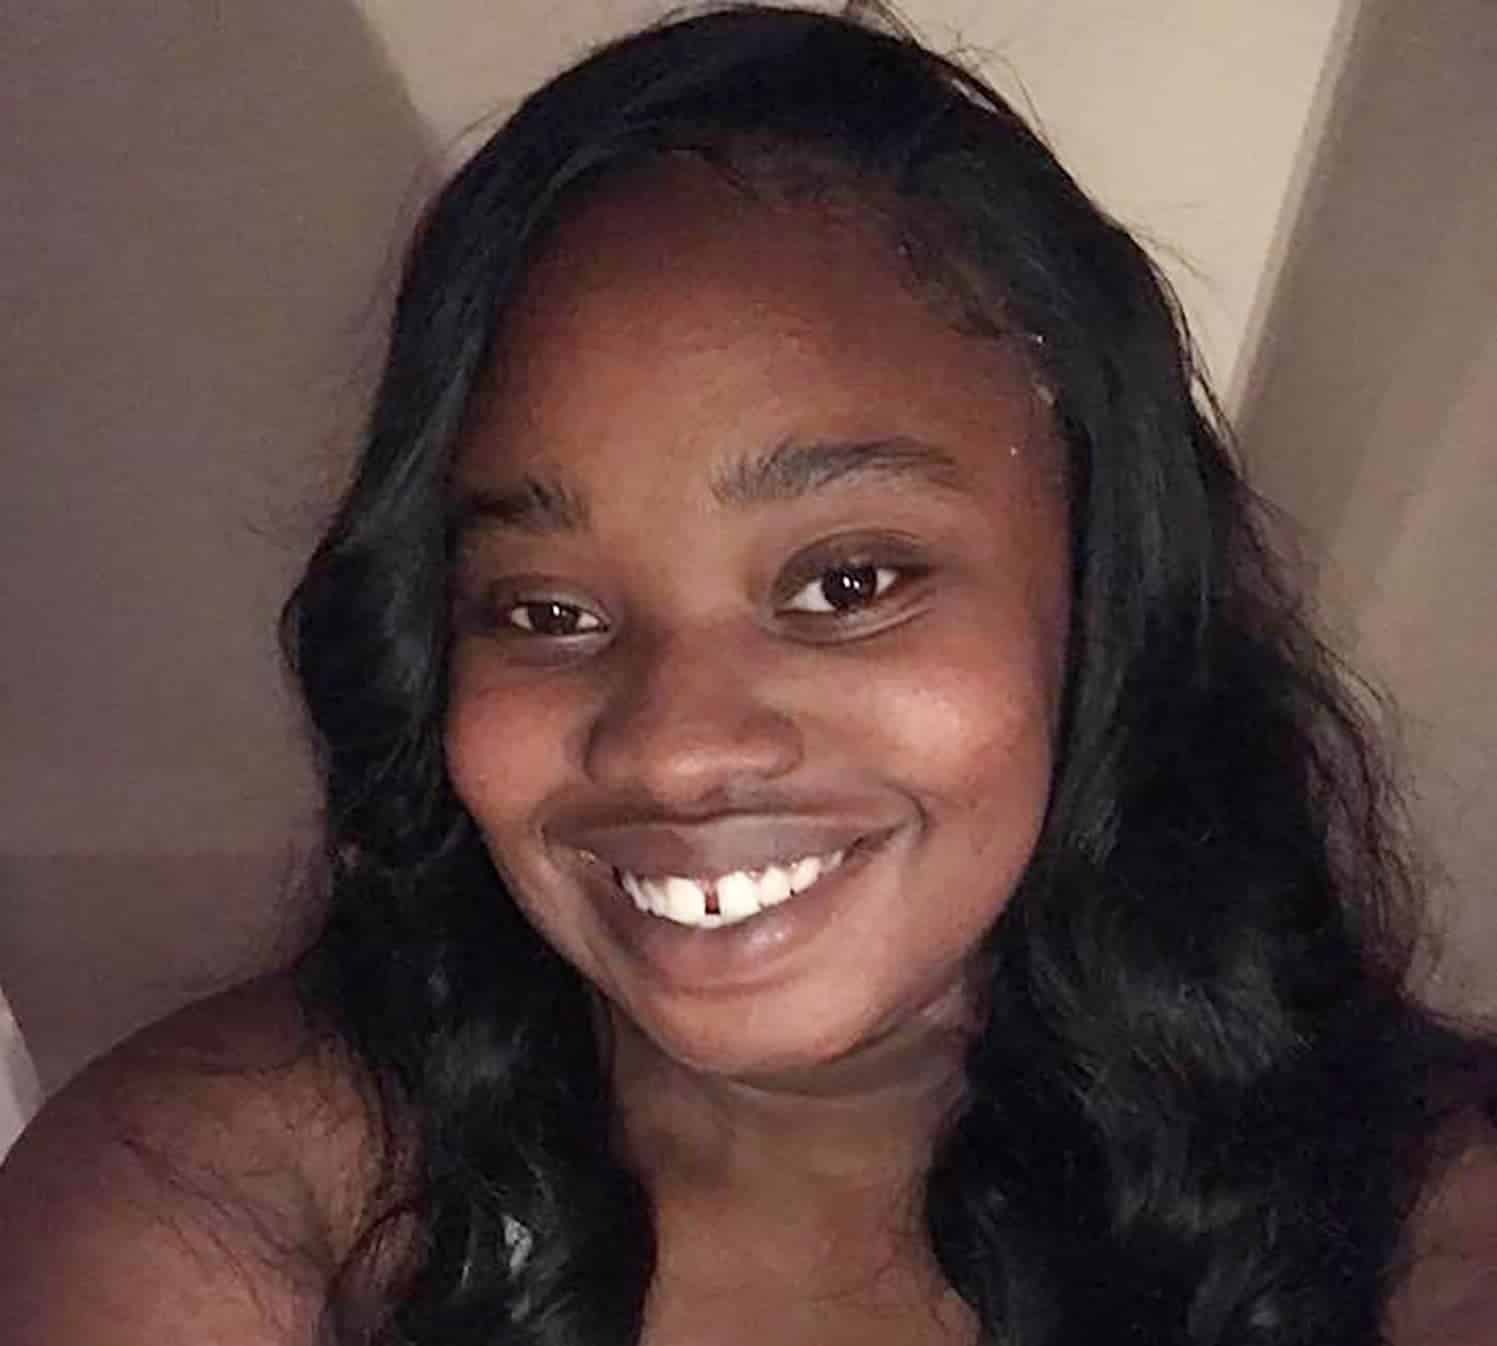 GBI releases bodycam footage in Brianna Grier death investigation